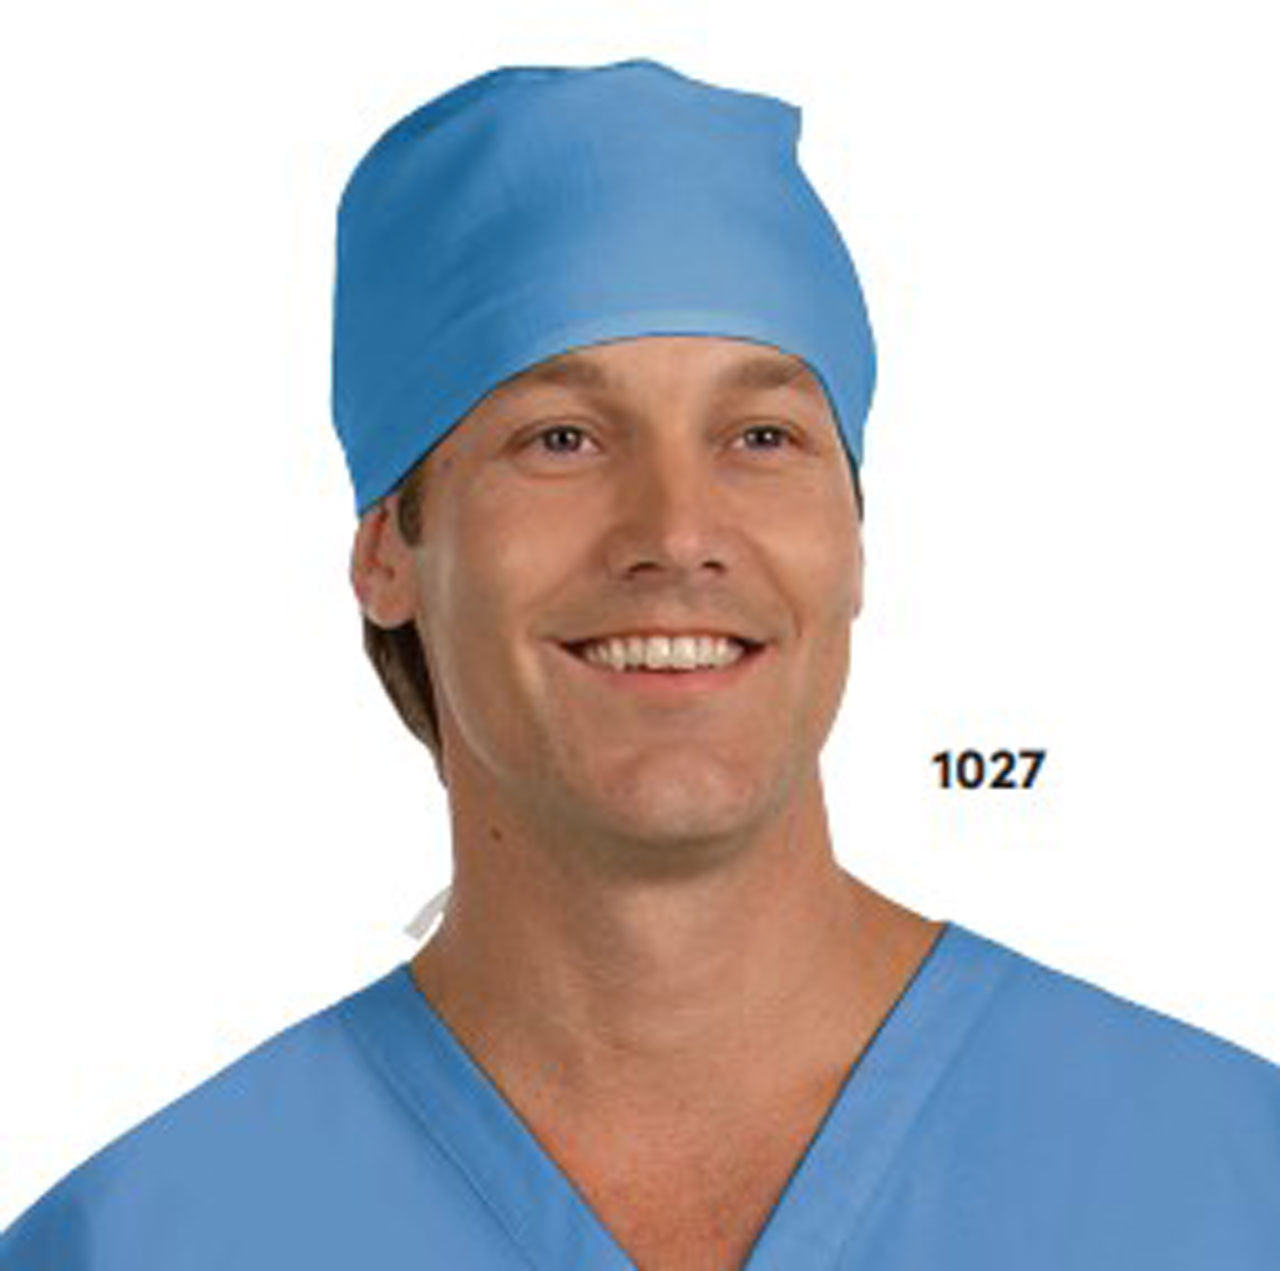 Who can use these bulk scrub caps in their profession?